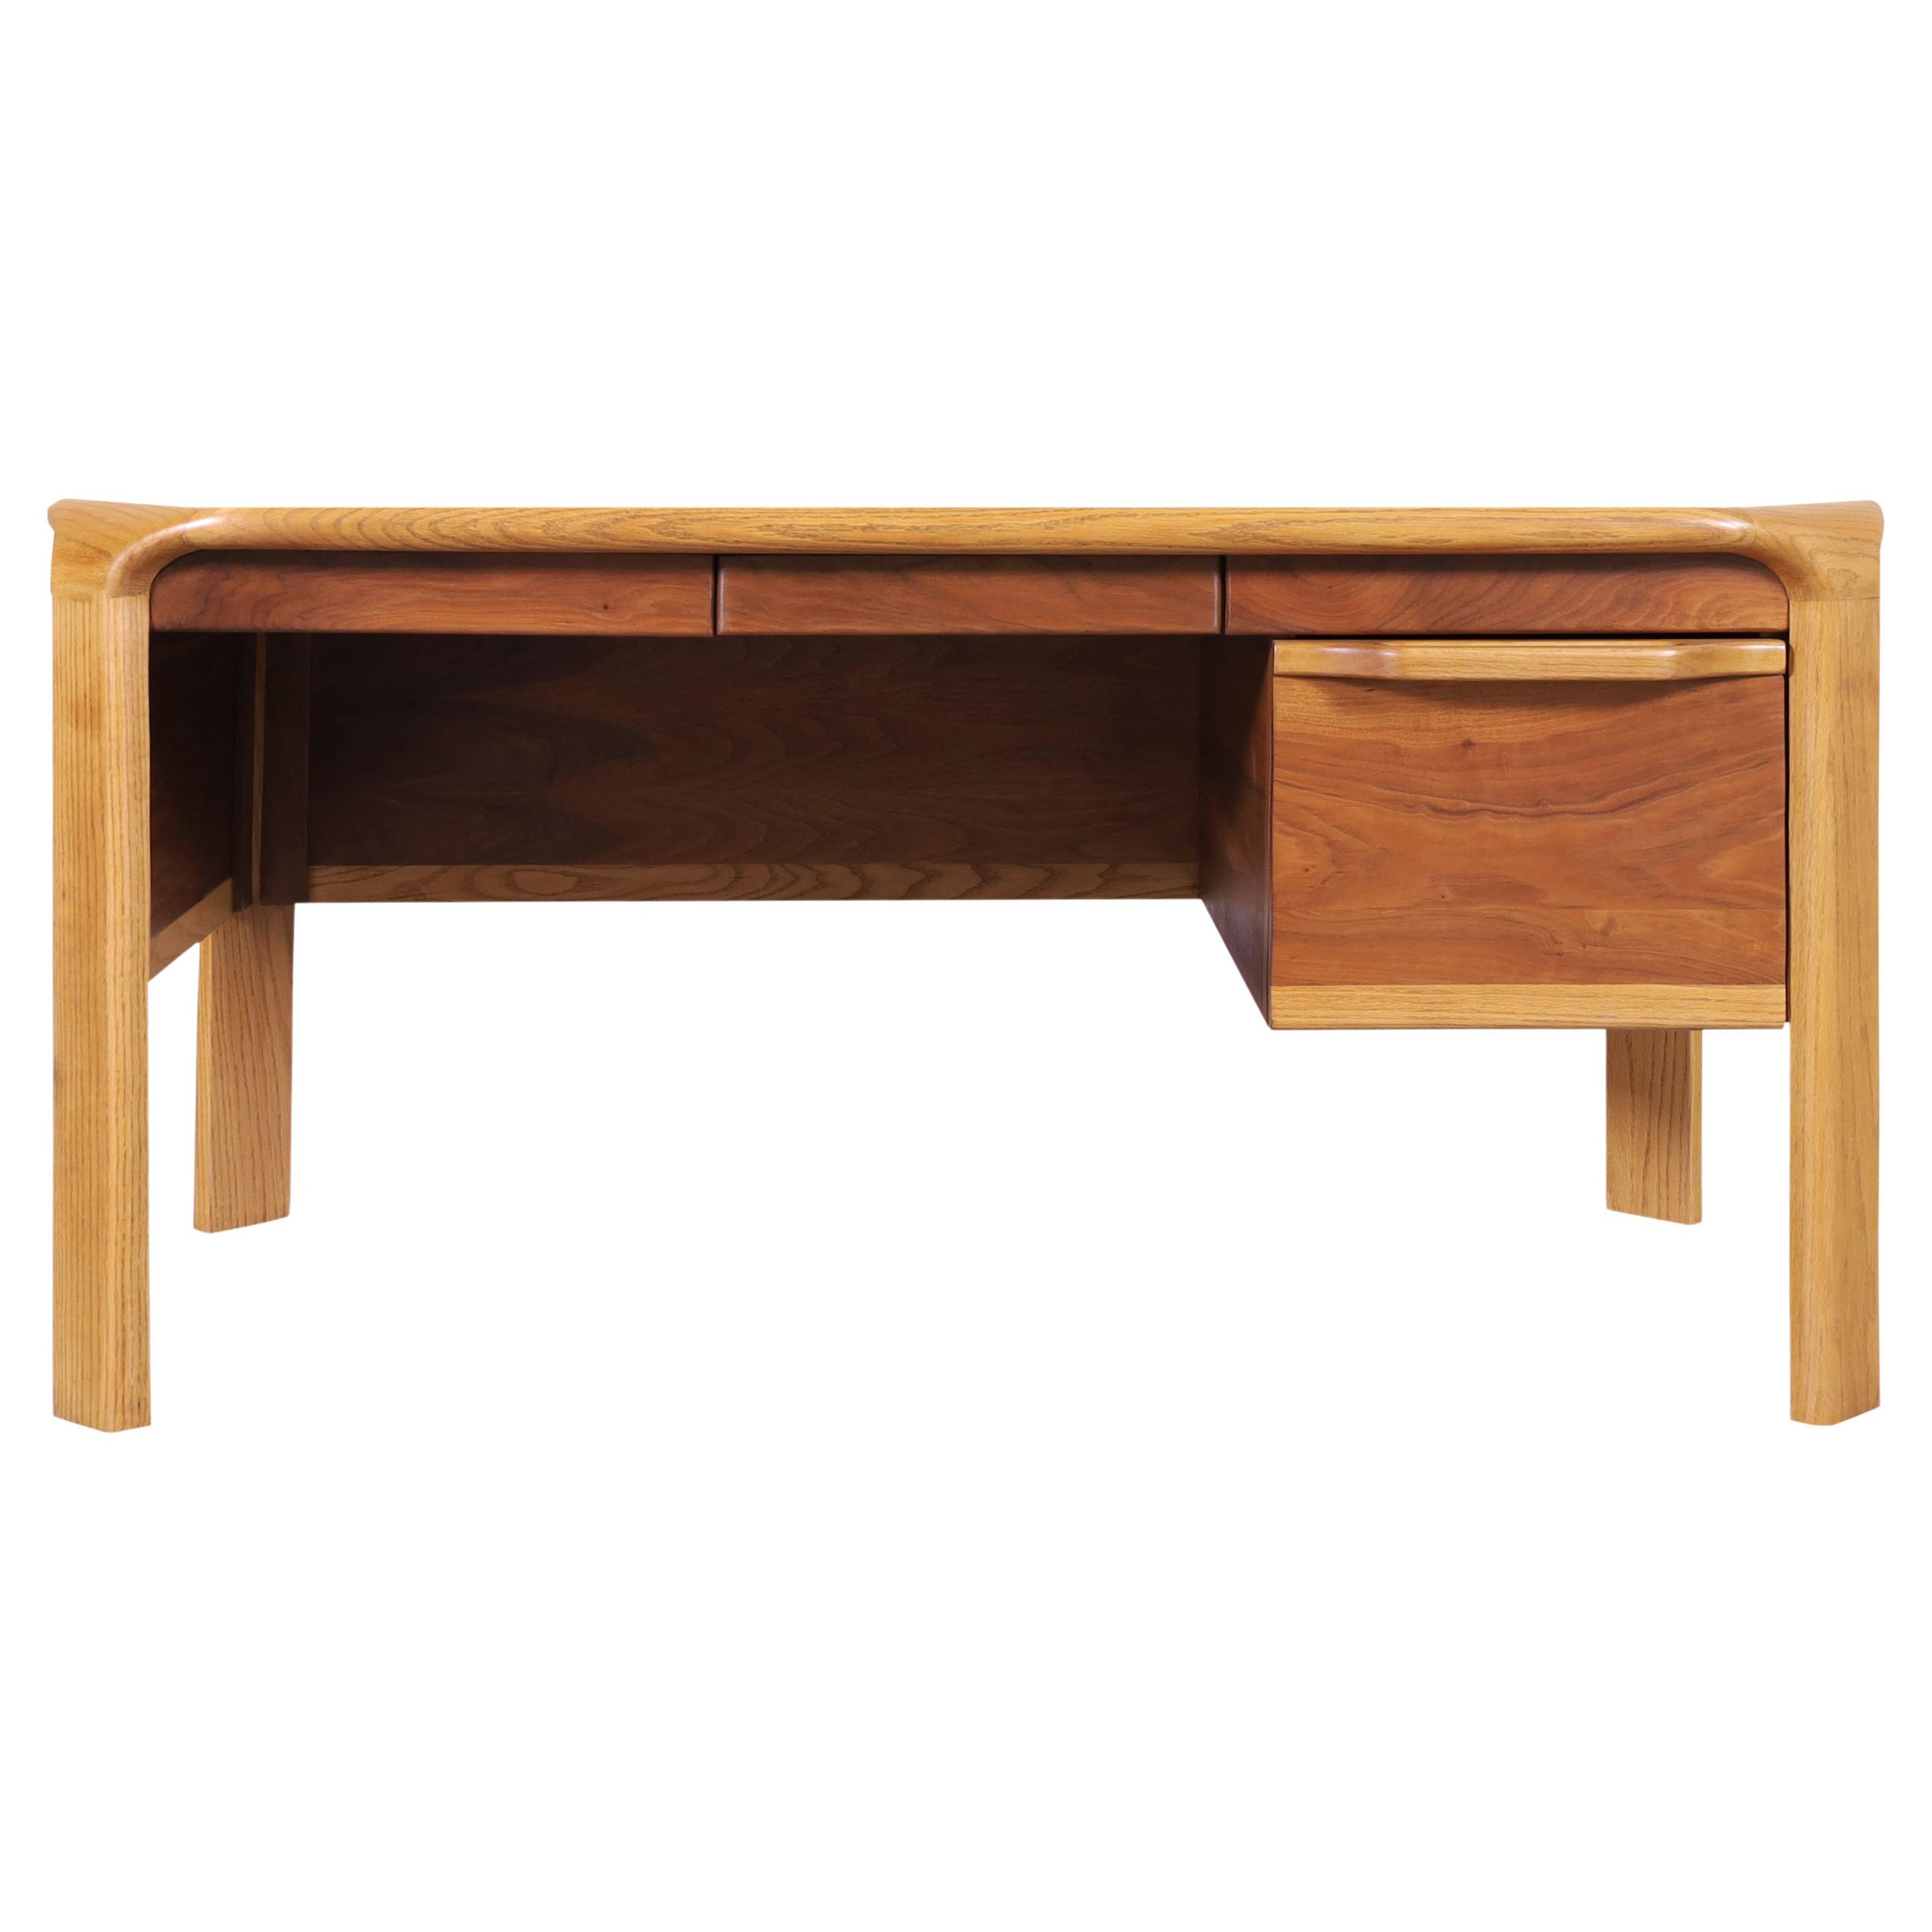 American Crafted Walnut and Oak Desk Attributed to Lou Hodges For Sale